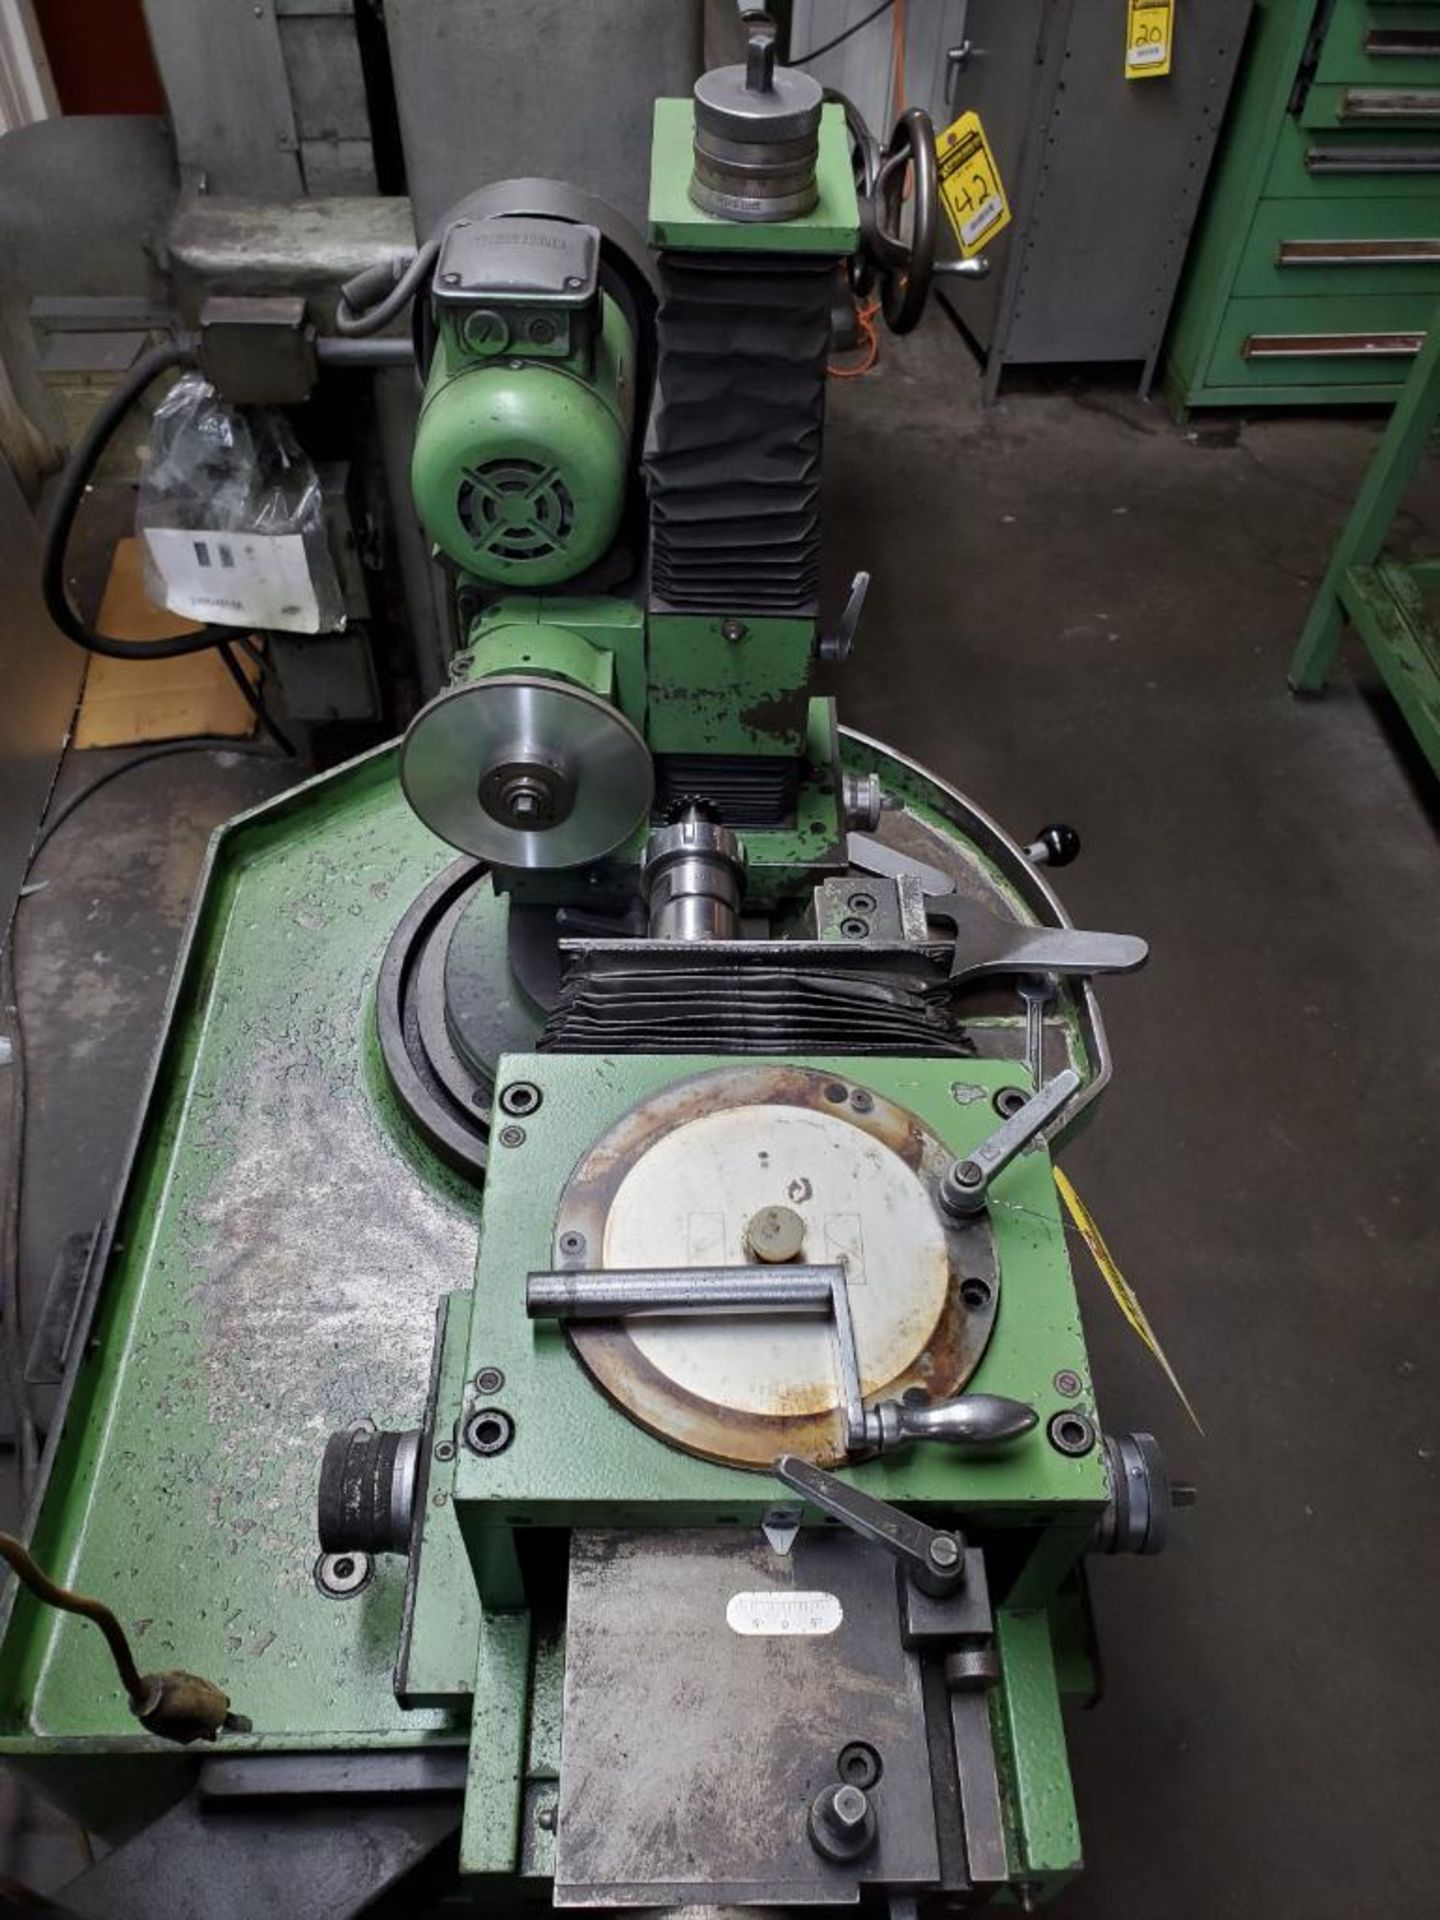 HAHN & KOLB STUTTGART PRECISION TOOL SHARPENER WITH STOCKER YALE COMPARATOR, ROTARY GRIND HEAD, - Image 8 of 8